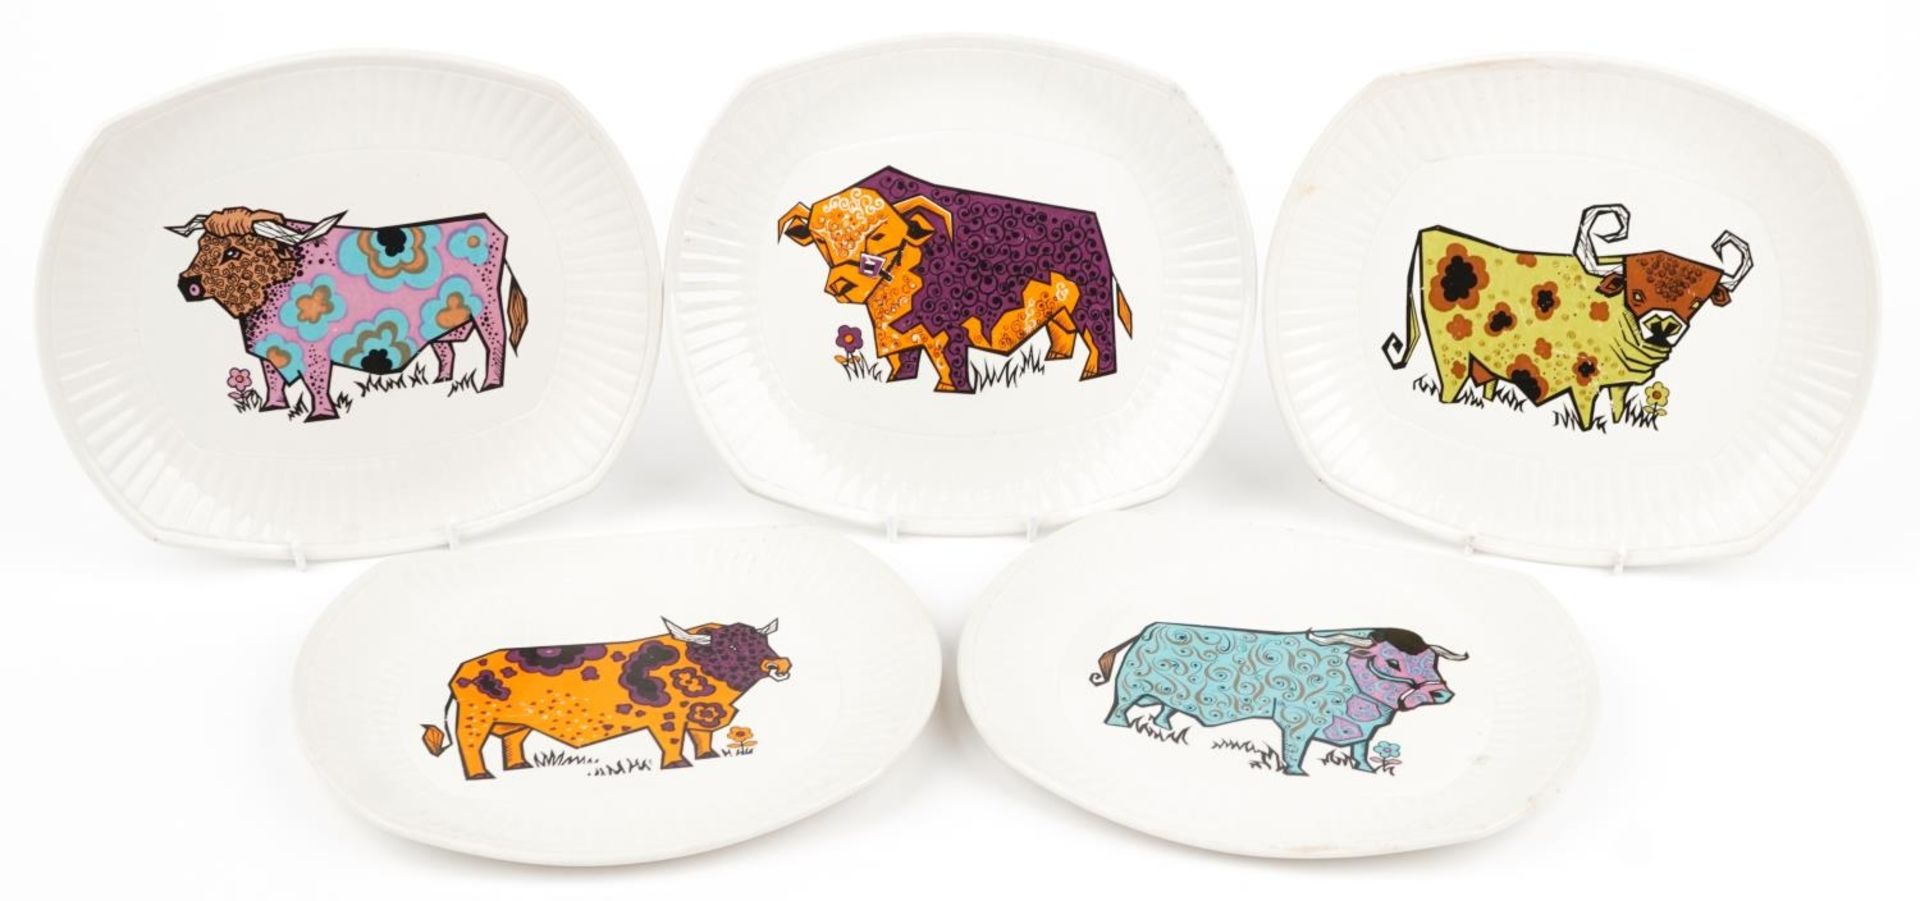 Five English Ironstone Pottery Beefeater plates, 28cm wide : For further information on this lot